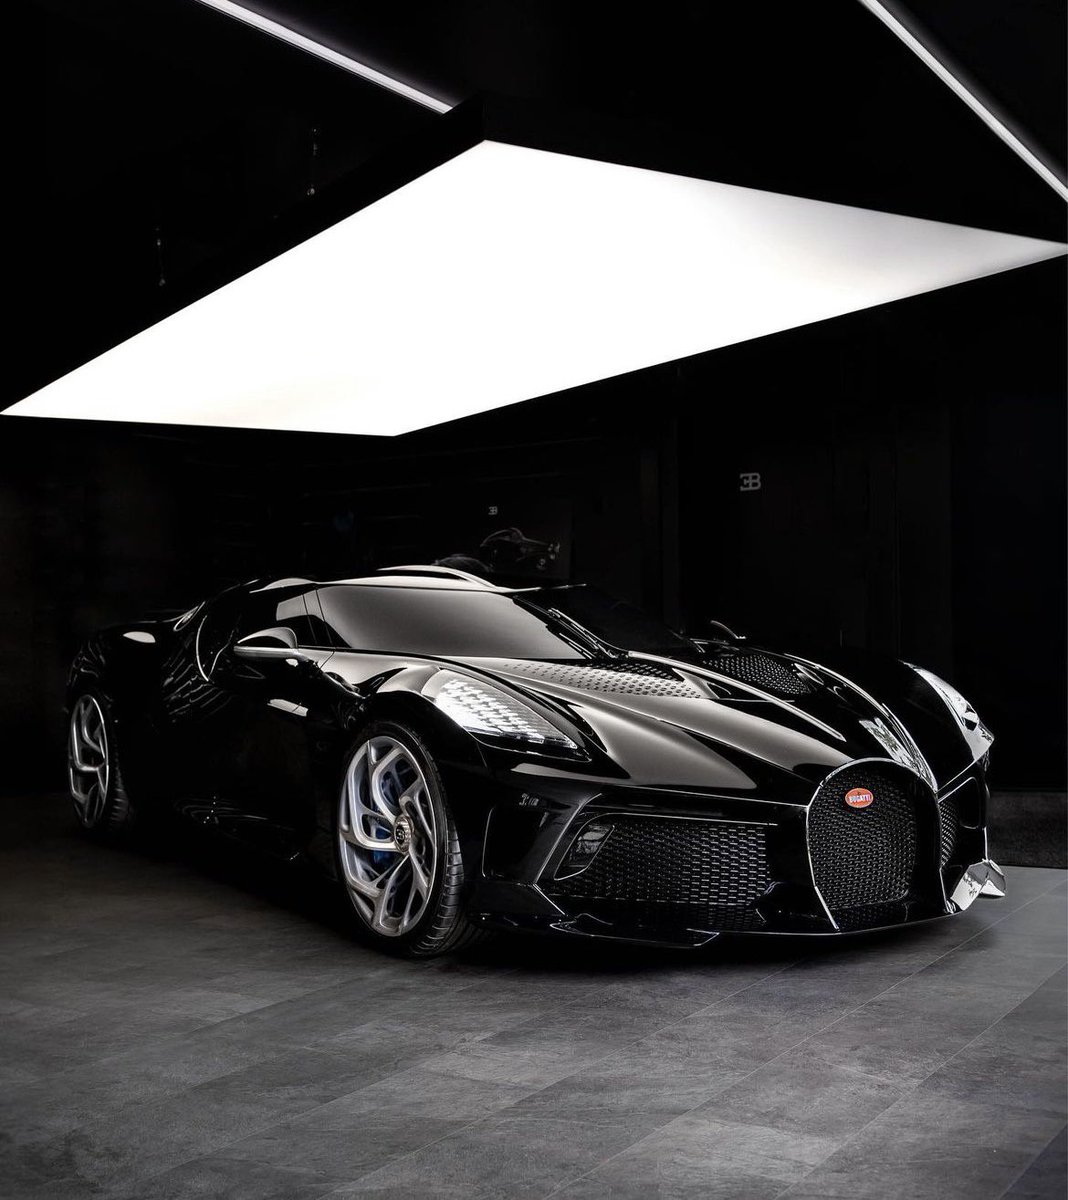 Which ALTcoins are you stacking up on, aiming for that 1000x? Dream big! That Bugatti in your garage might be closer than you think. 😉💰 #CryptoGoals #DreamRide #Bugatti #Bullrun #Crypto